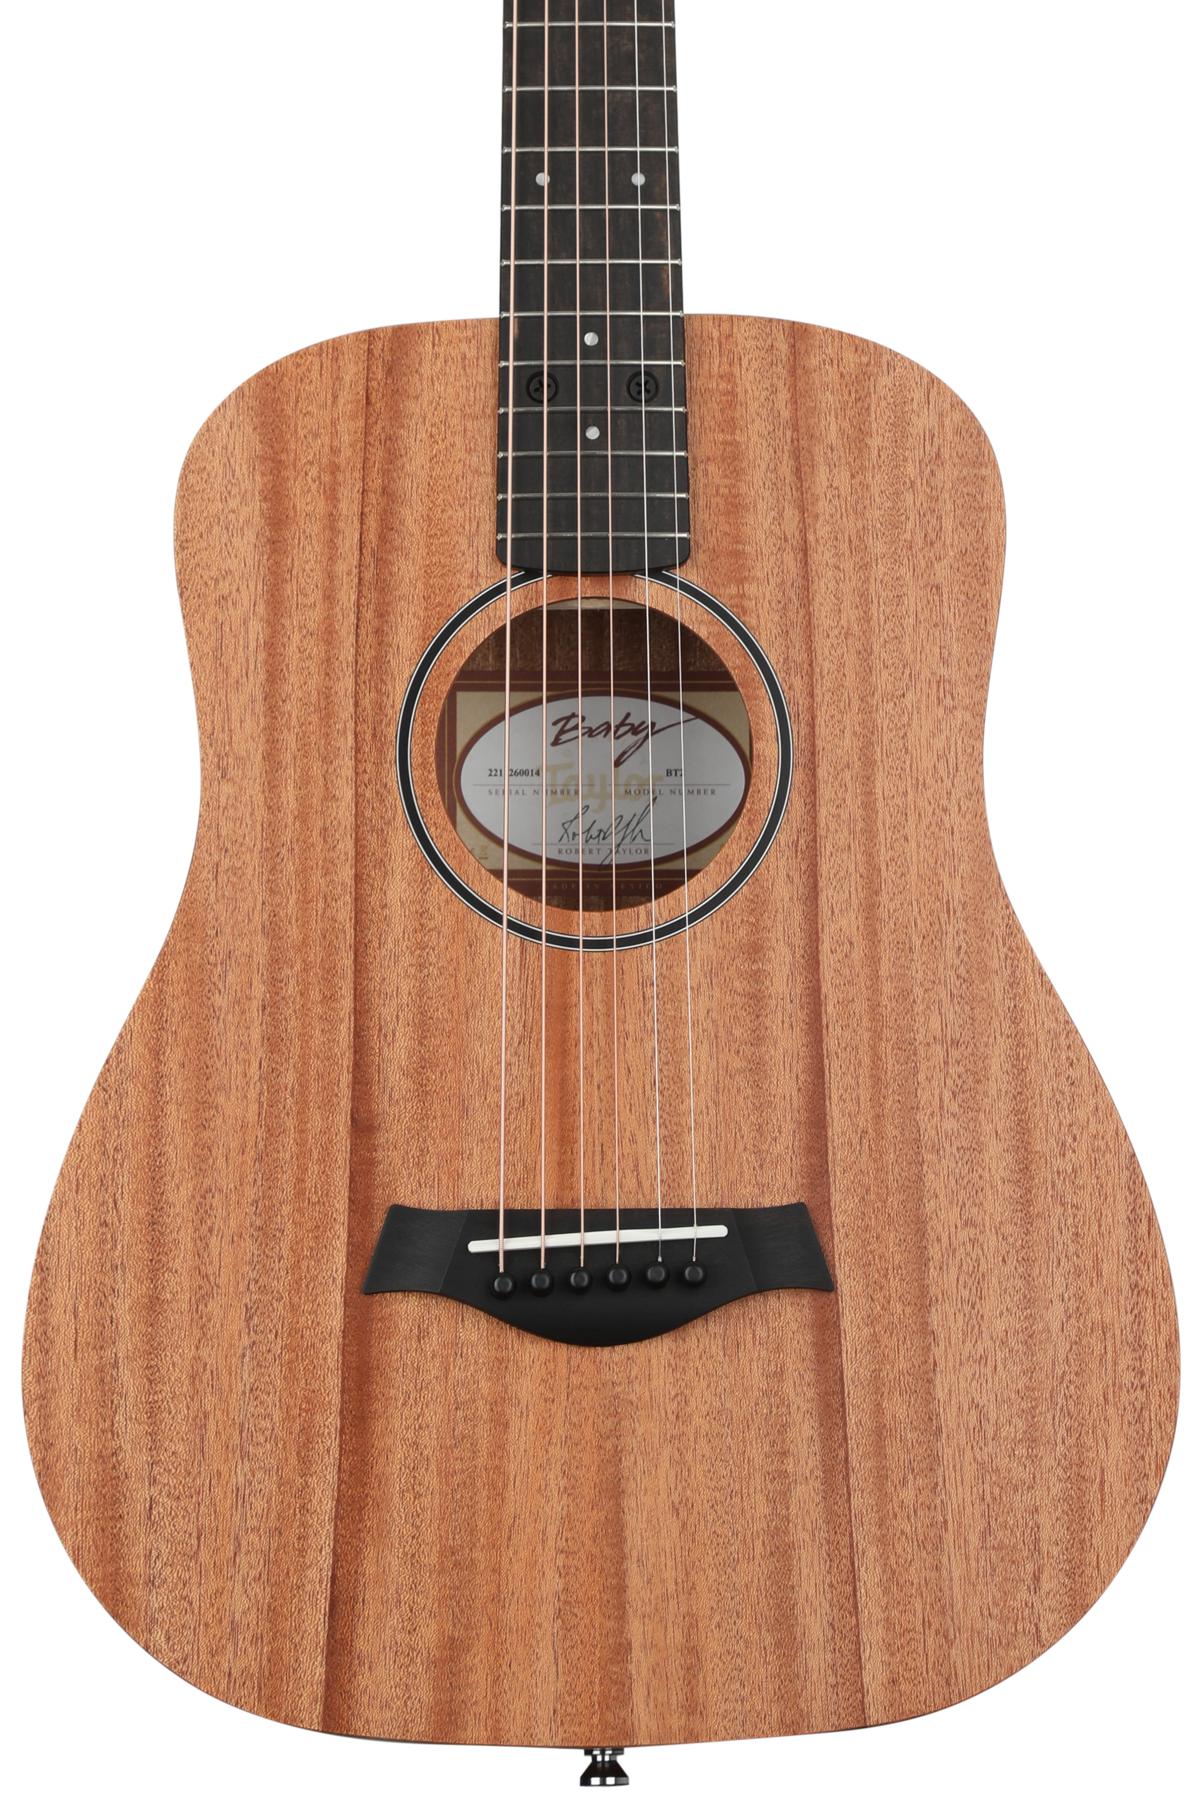 1. Taylor BT2 Baby Taylor Acoustic Guitar